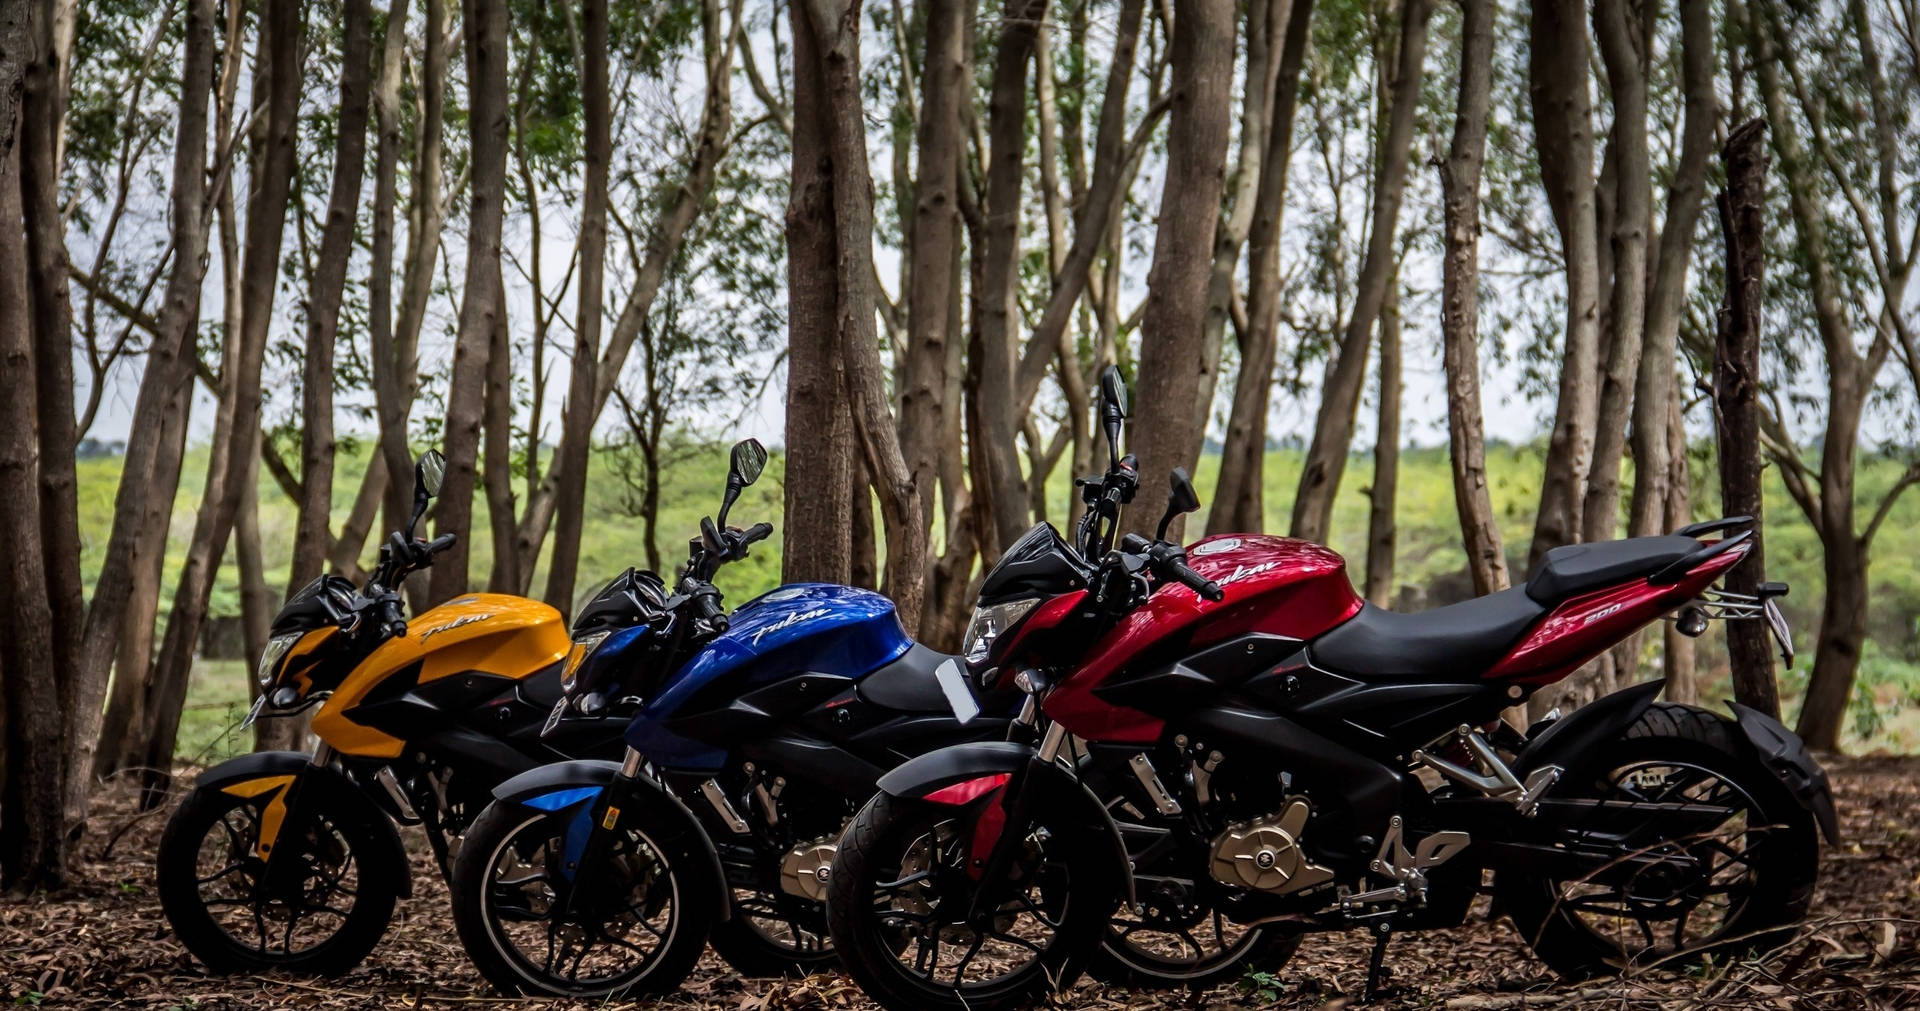 Ns 200 Motorcycles In Forest Wallpaper